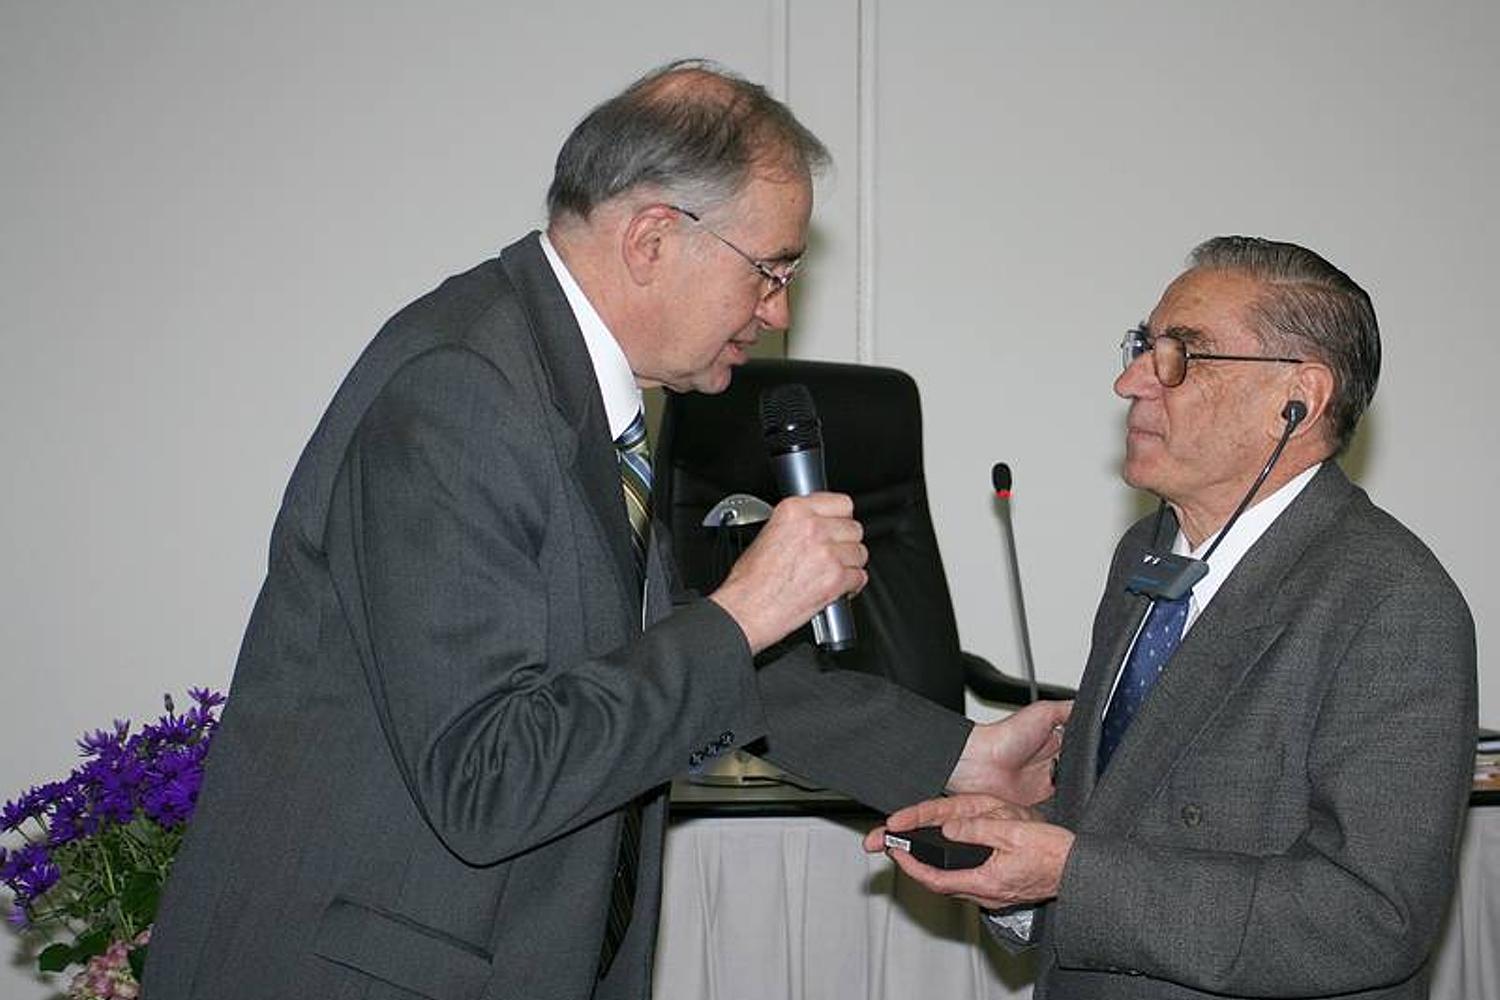 Words of thanks for District Apostle Mario Fiore (Argentina) who had served for many years